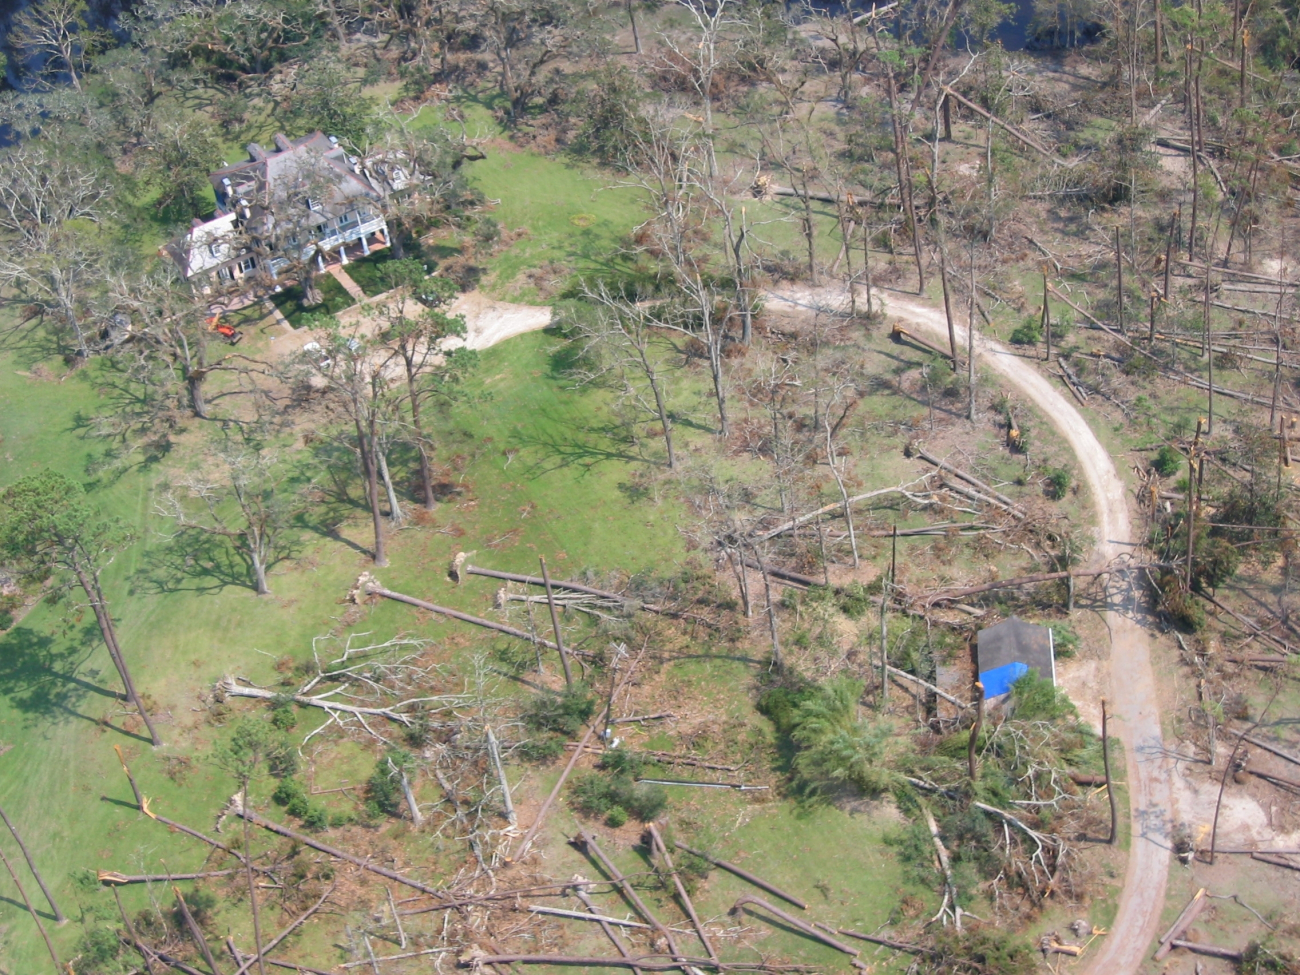 Thousands of downed trees following Hurricane Katrina